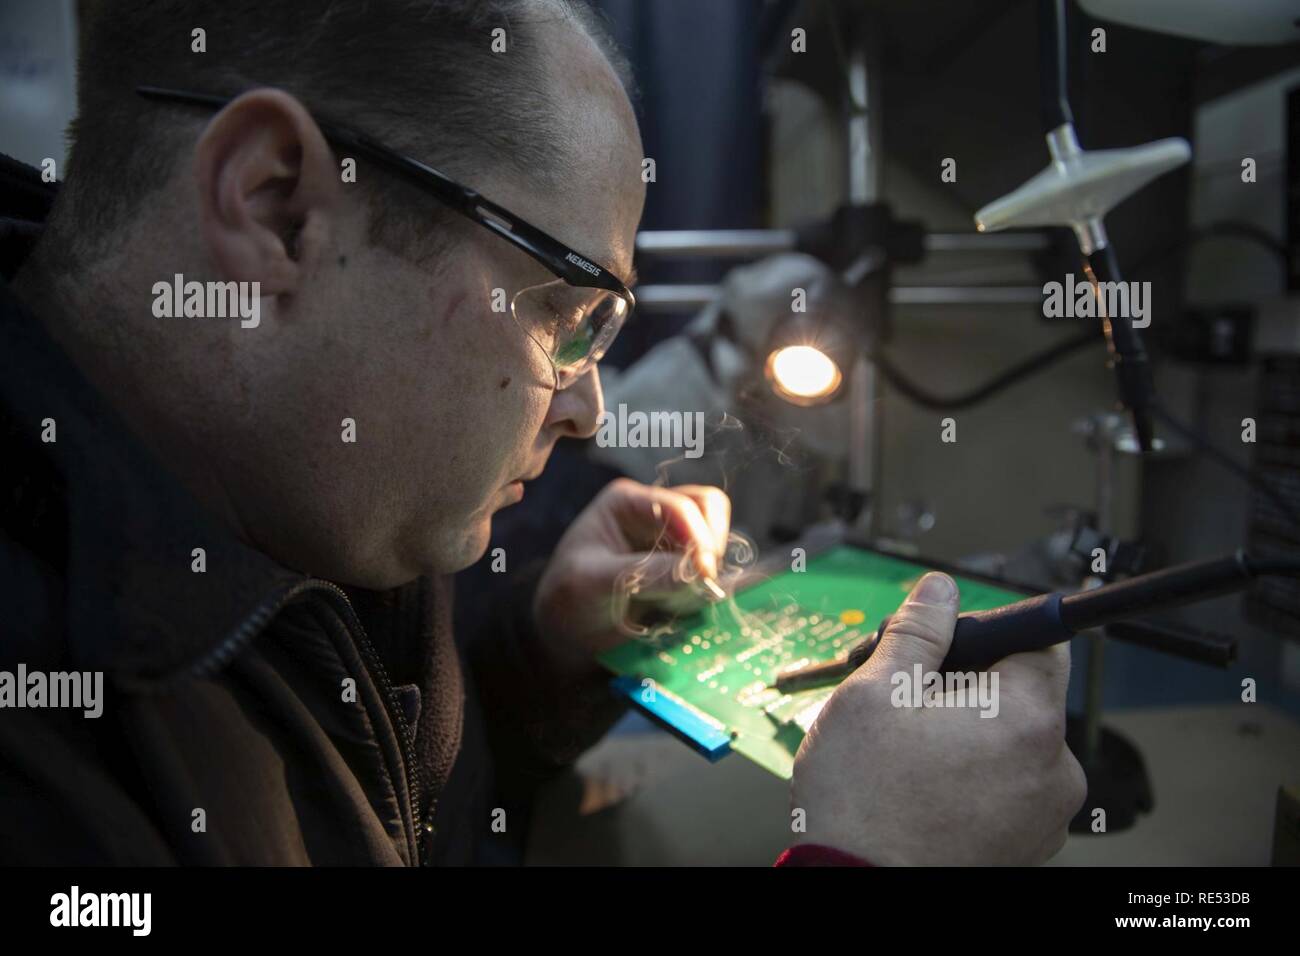 MEDITERRANEAN SEA (Jan. 5, 2019) Aviation Electronics Technician 1st Class Christopher Monger installs a new micro circuit on a circuit card for a CH-53E Super Stallion in the aviation intermediate maintenance department solder shop aboard the Wasp-class amphibious assault ship USS Kearsarge (LHD 3). Kearsarge is on a scheduled deployment as part of the Kearsarge Amphibious Ready Group in support of maritime security operations, crisis response and theater security cooperation, while also providing a forward naval presence. Stock Photo